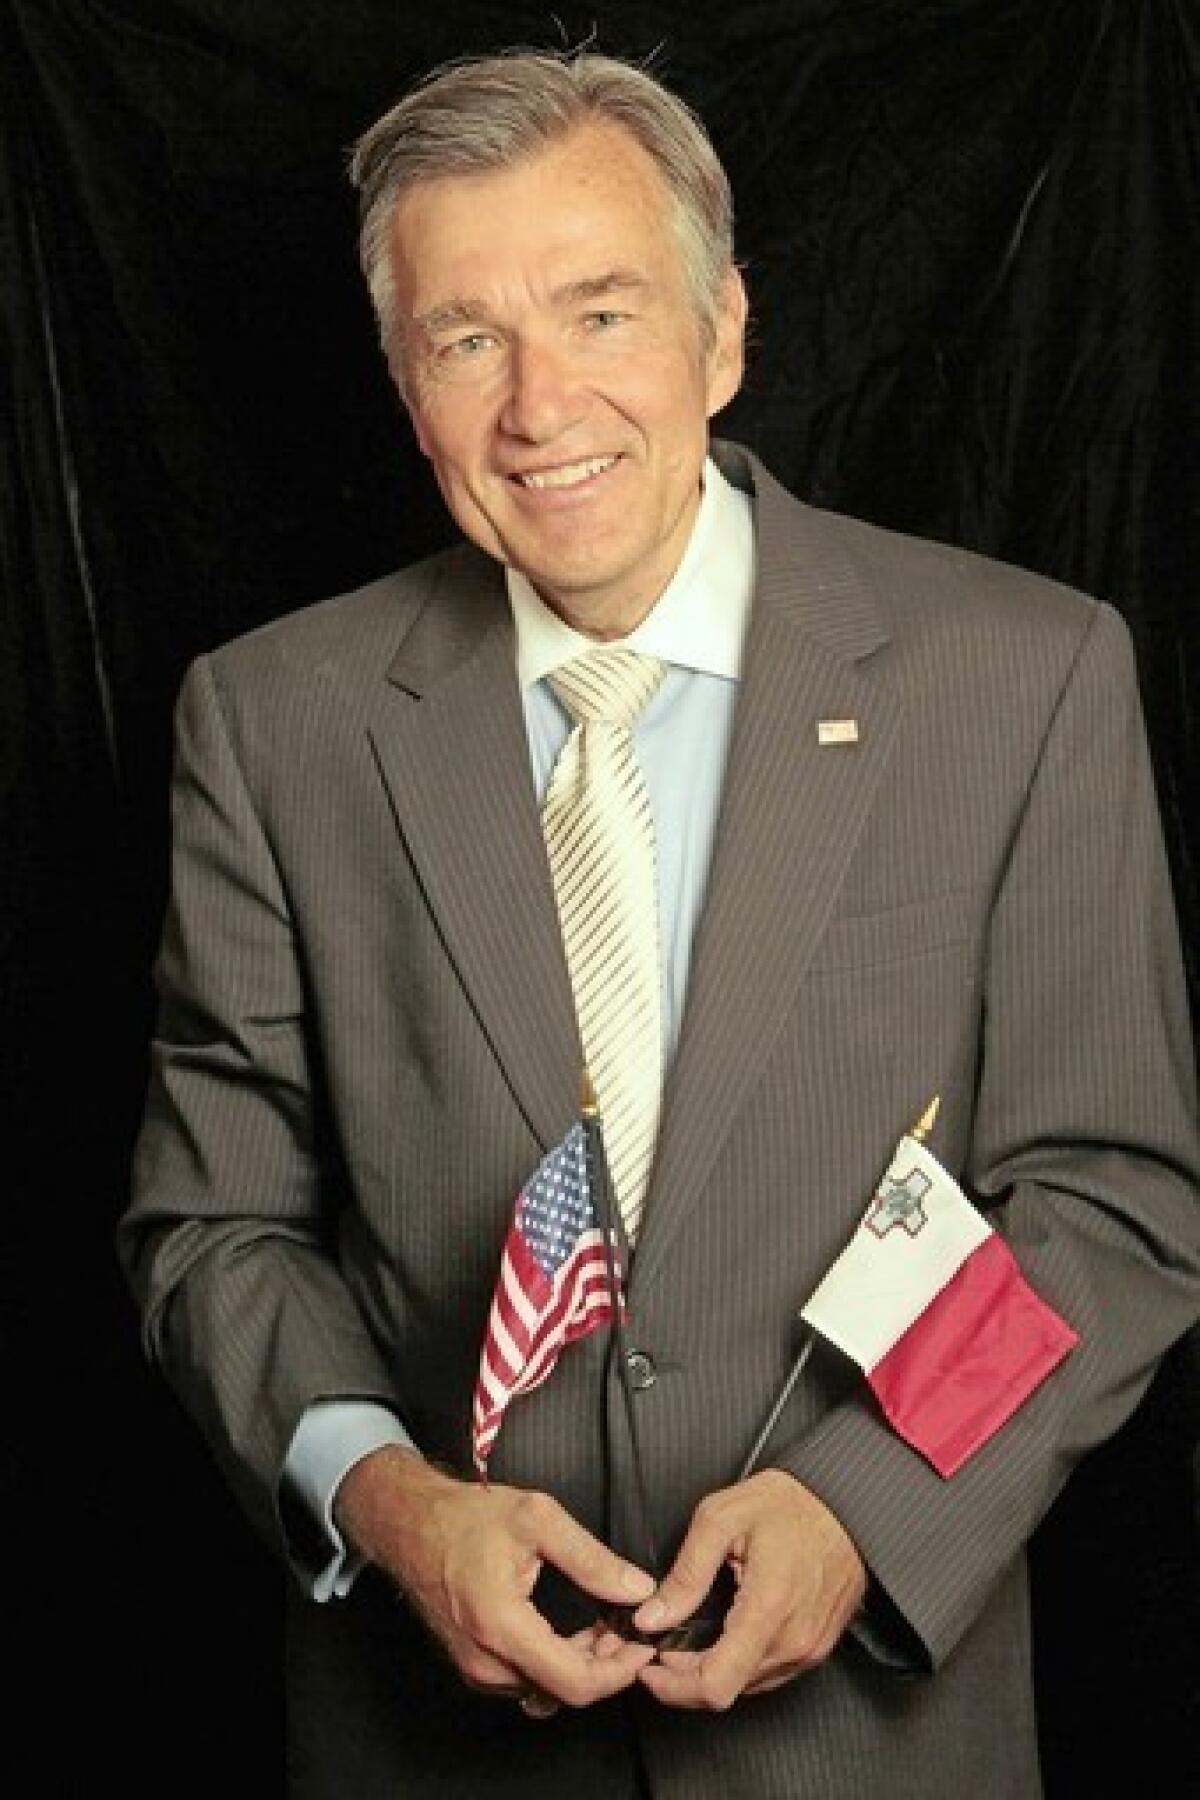 Douglas Kmiec is seen in his office at Pepperdine Law School in Malibu holding both an American flag and the flag of Malta.